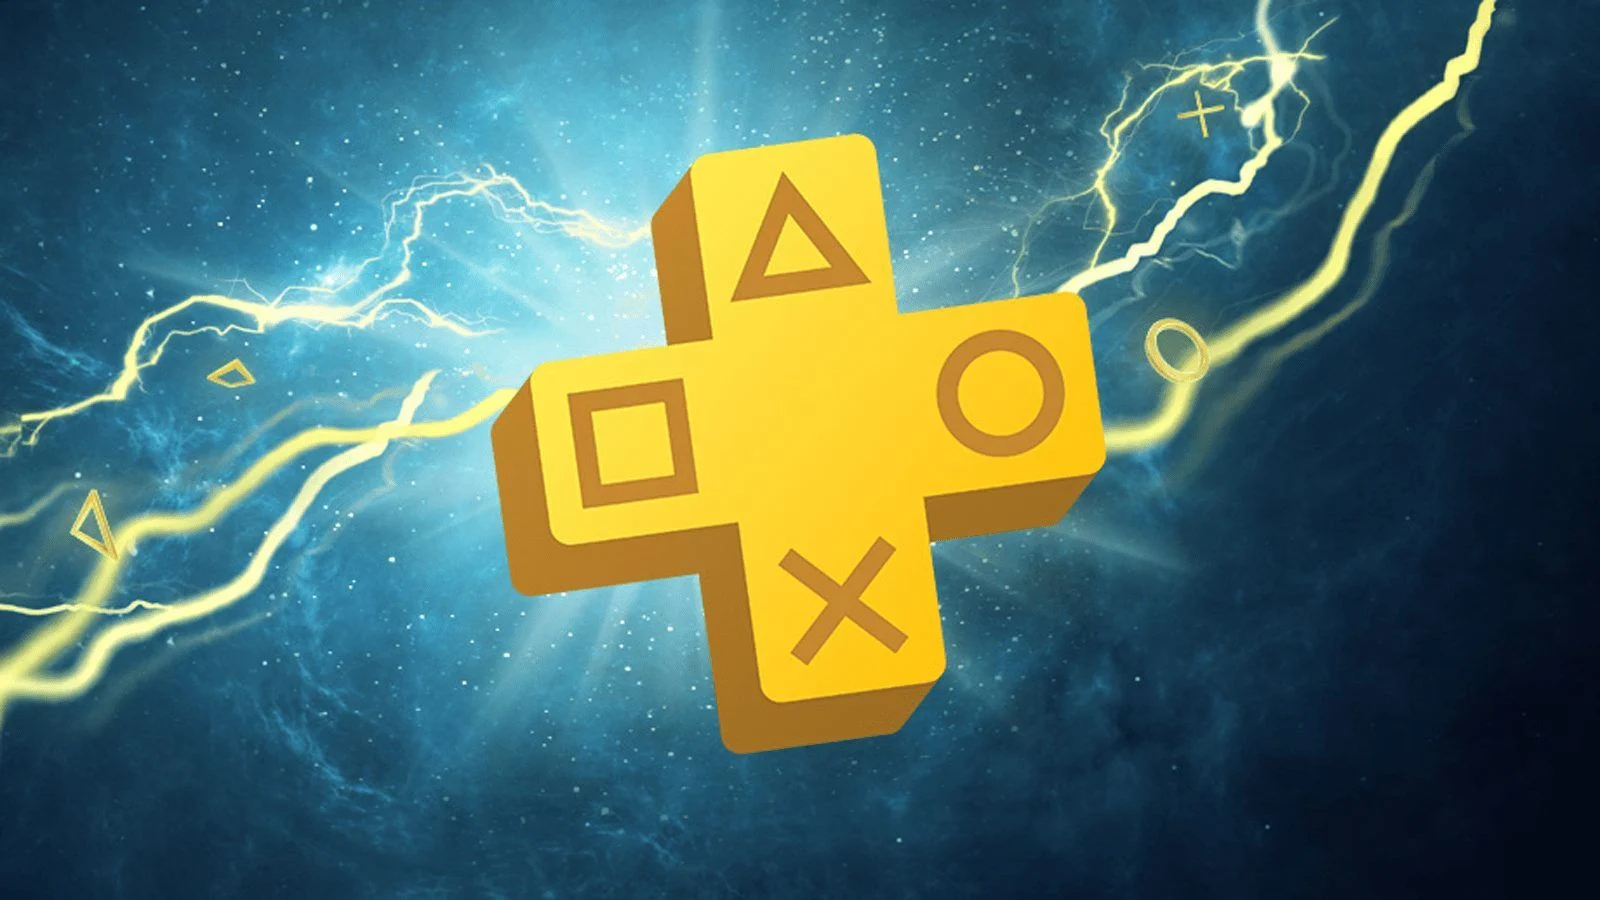 Media: The updated PS Plus subscription is scheduled to launch in Russia